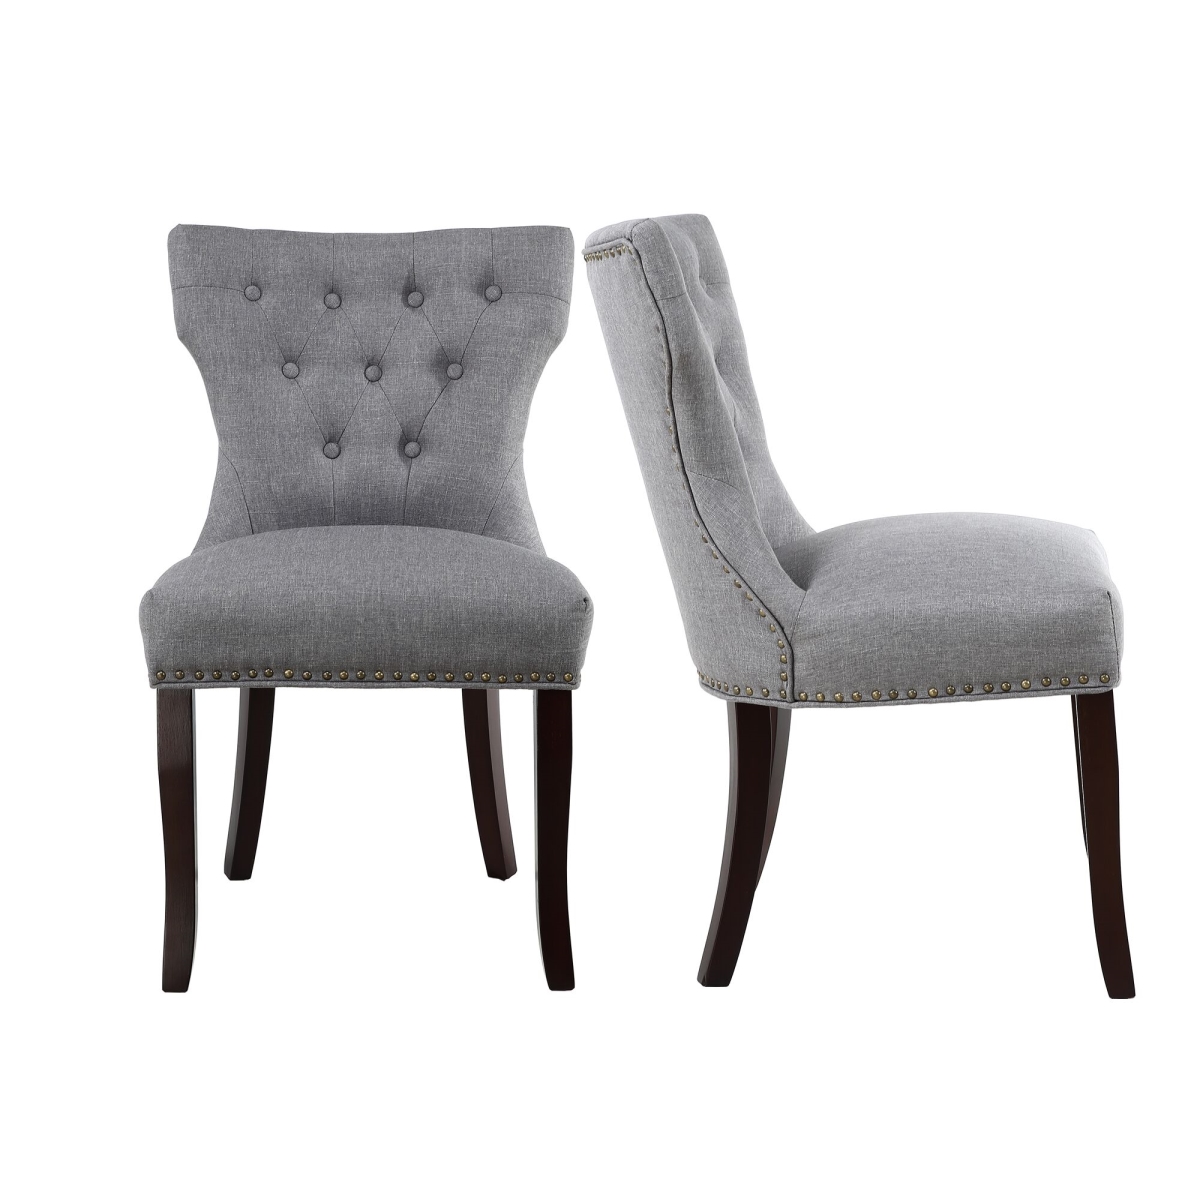 Ow-lss8097c-gray Mid Back Button-tufted Fabric Dining Side Chair, Gray - Set Of 2